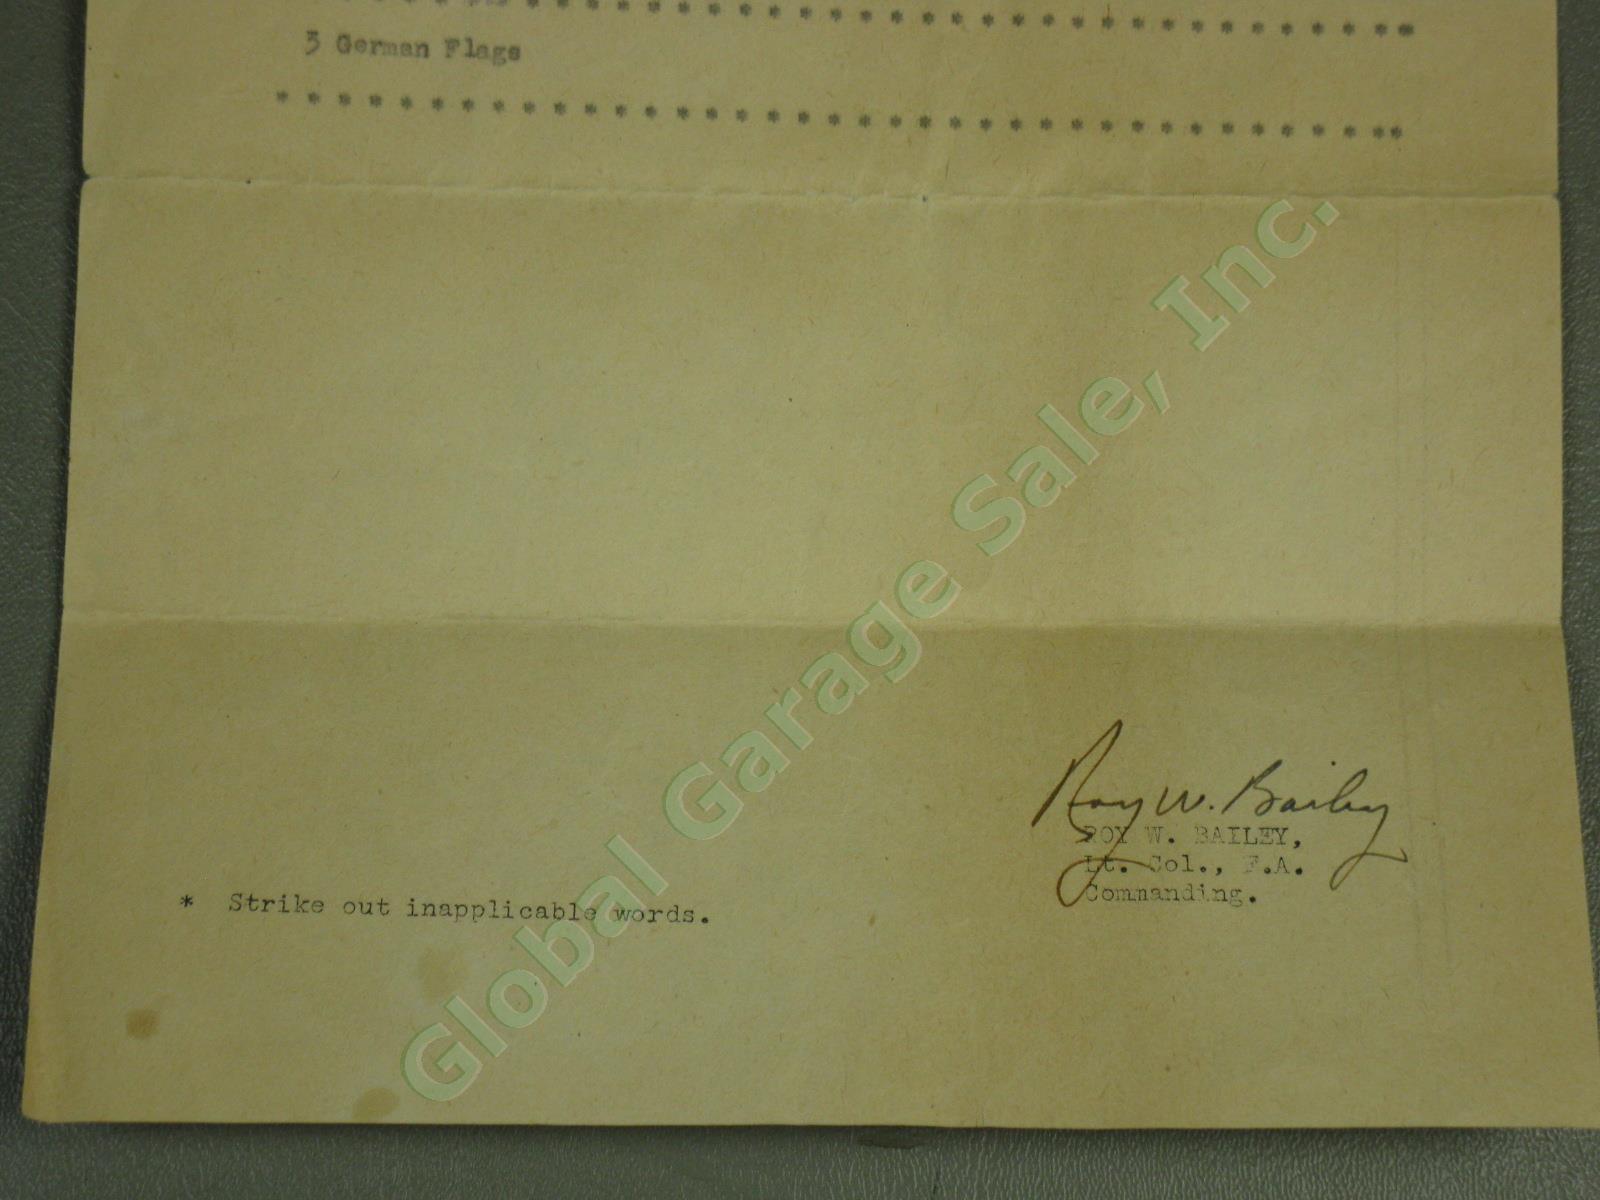 2 RARE Vtg WWII 1943 US Army Military German Flags Capture Papers APO 782 Italy 5